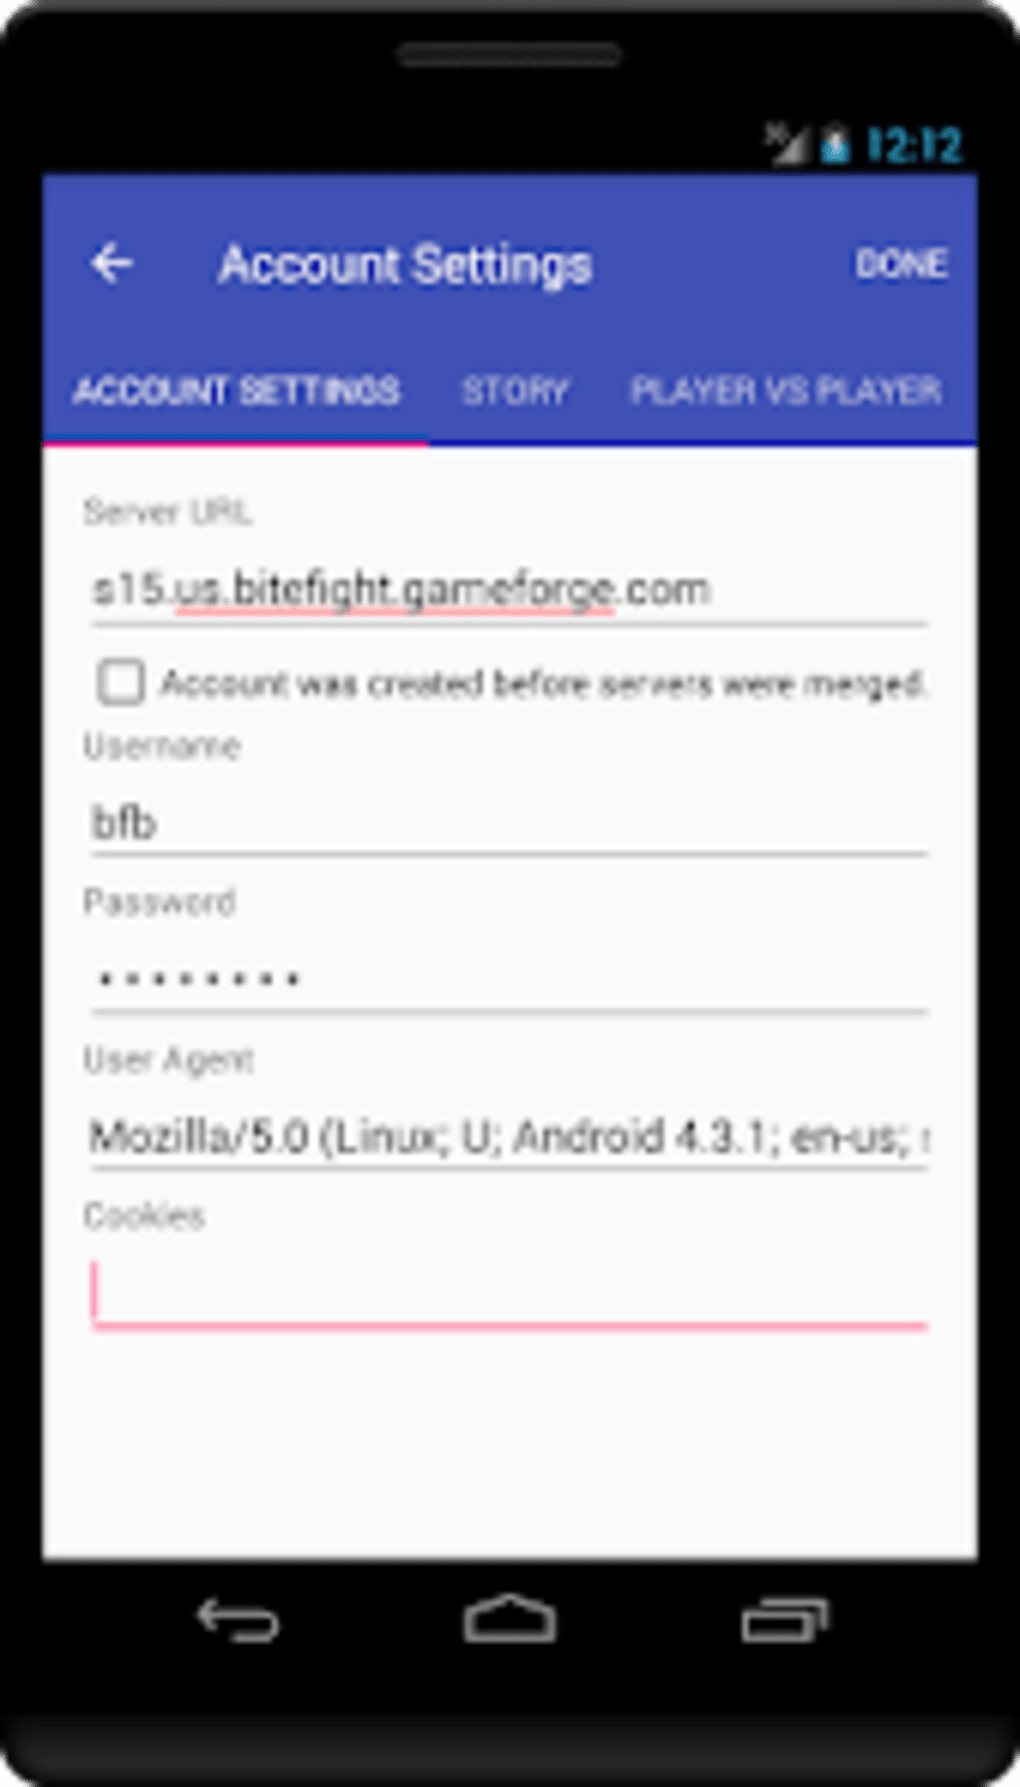 Bitefight Bot - Bitefight Bot 1.4.0 for Android is now